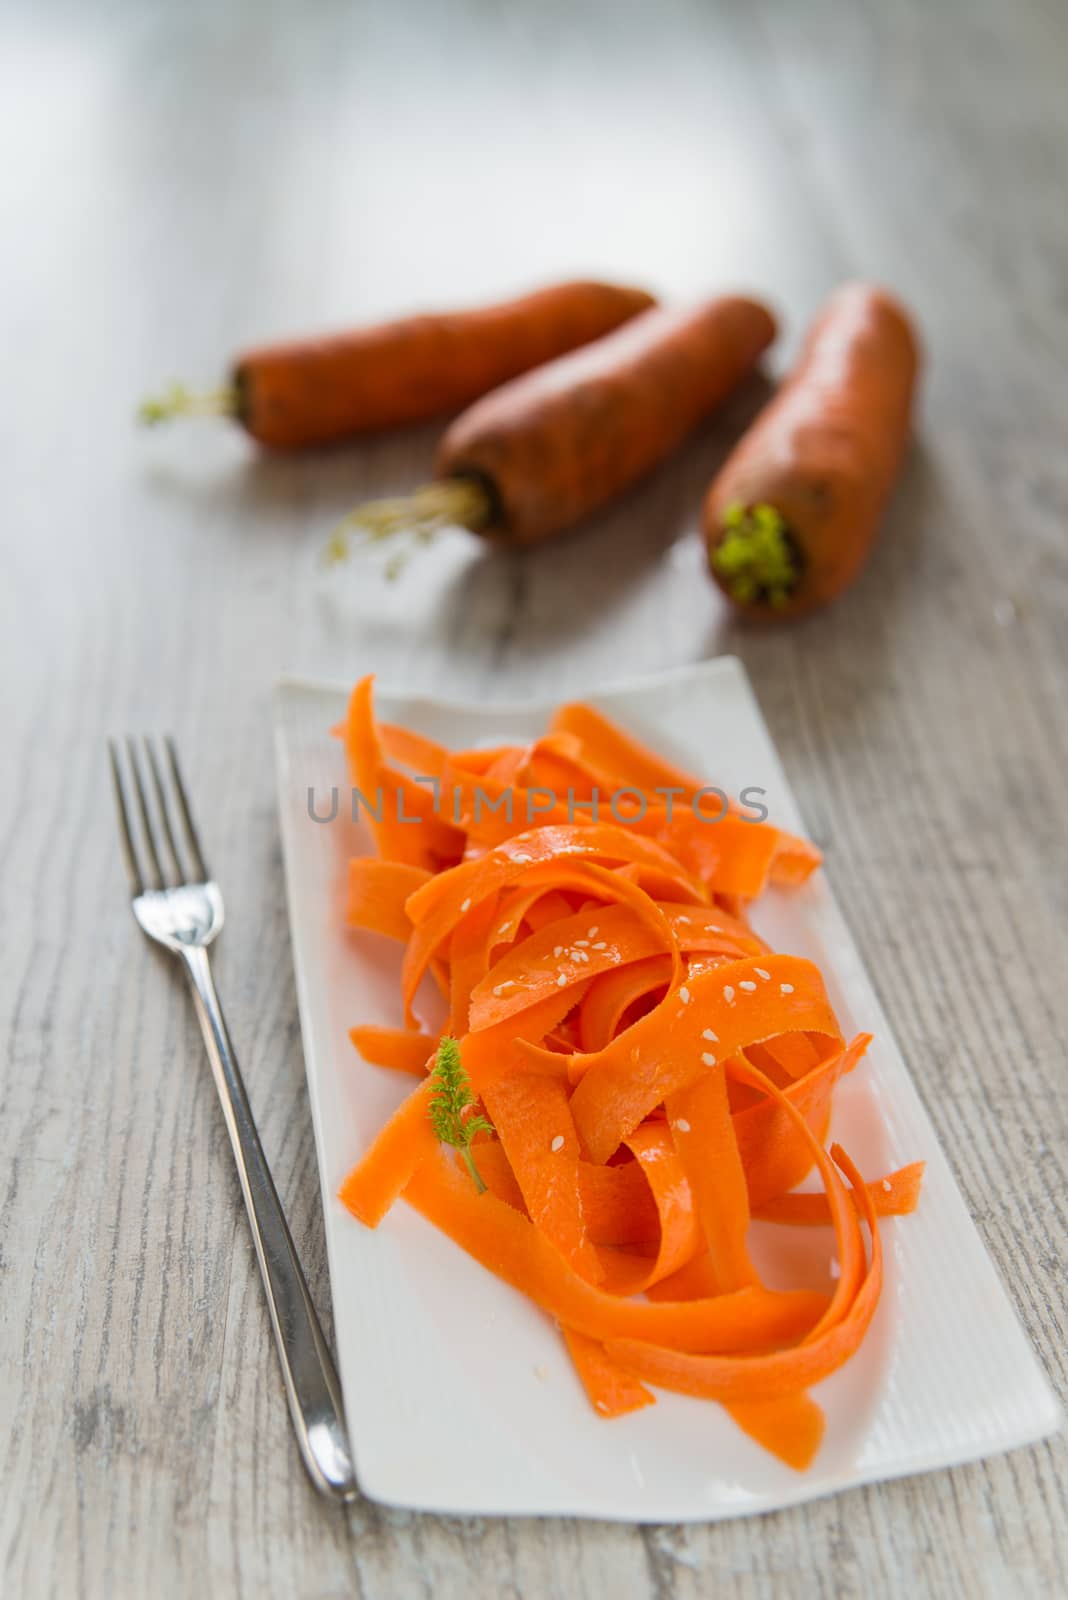 Vitamin carrot salad on the white plate